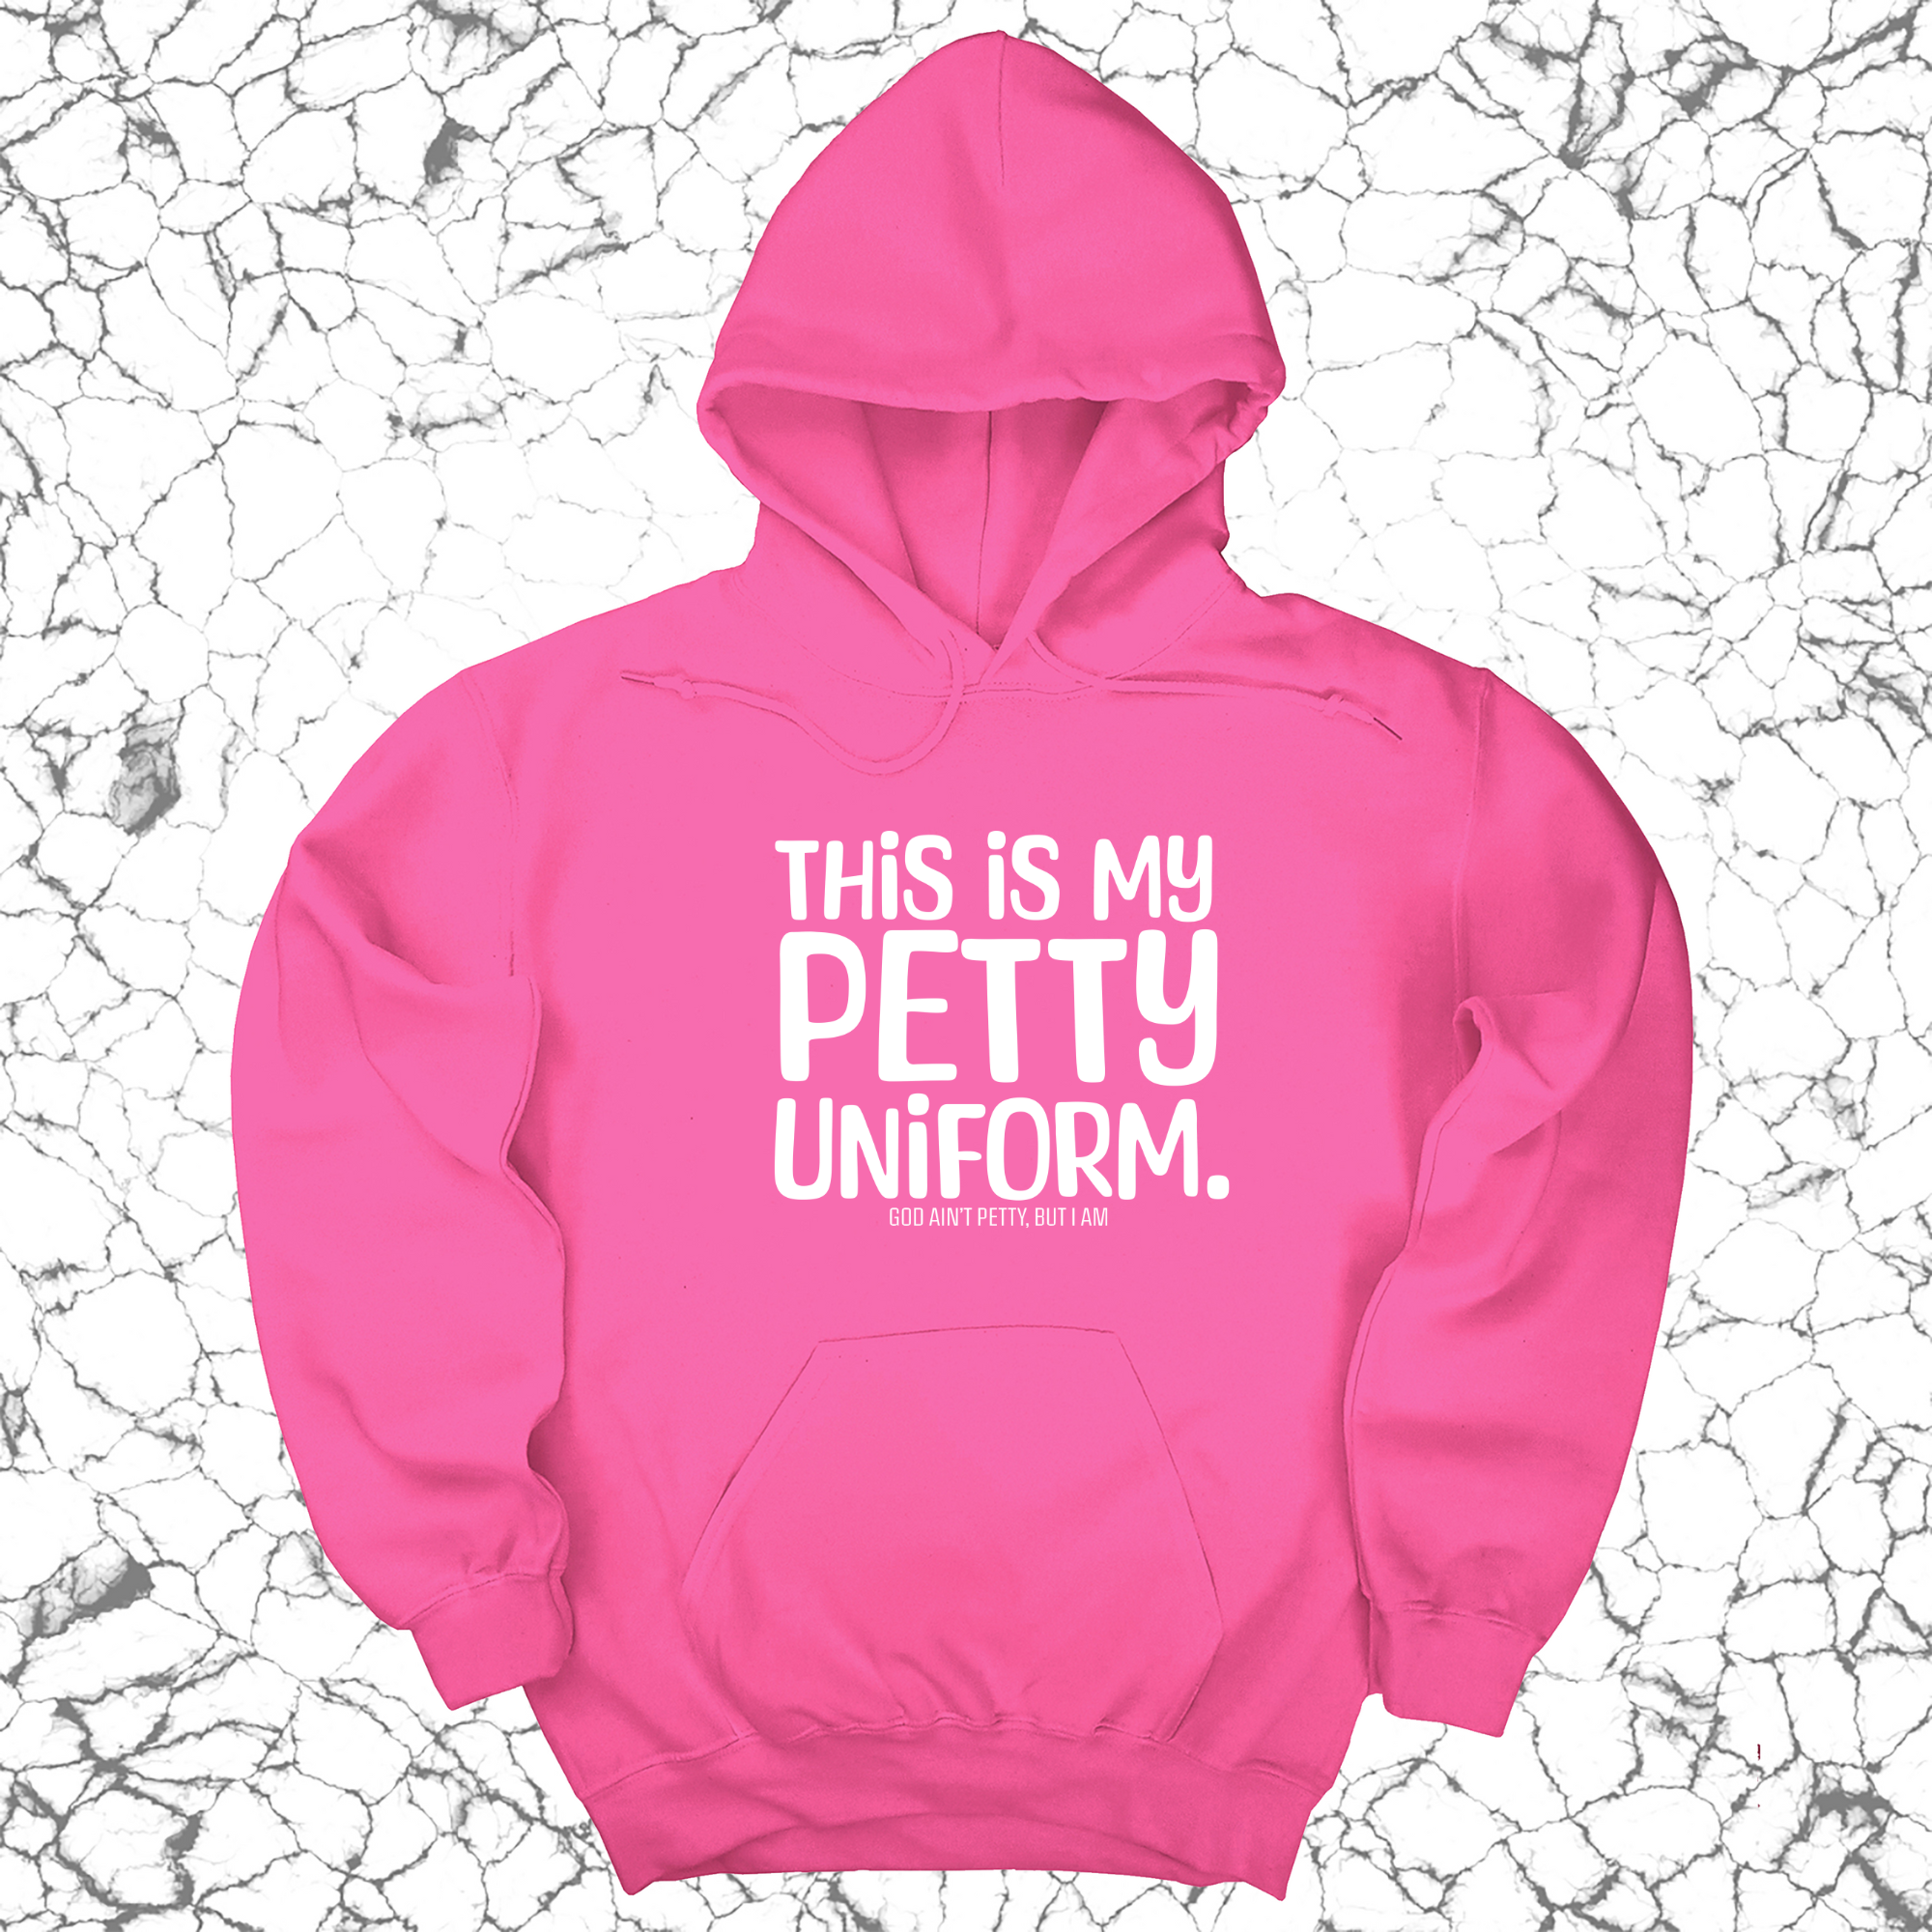 This is my Petty Uniform Unisex Hoodie-Hoodie-The Original God Ain't Petty But I Am